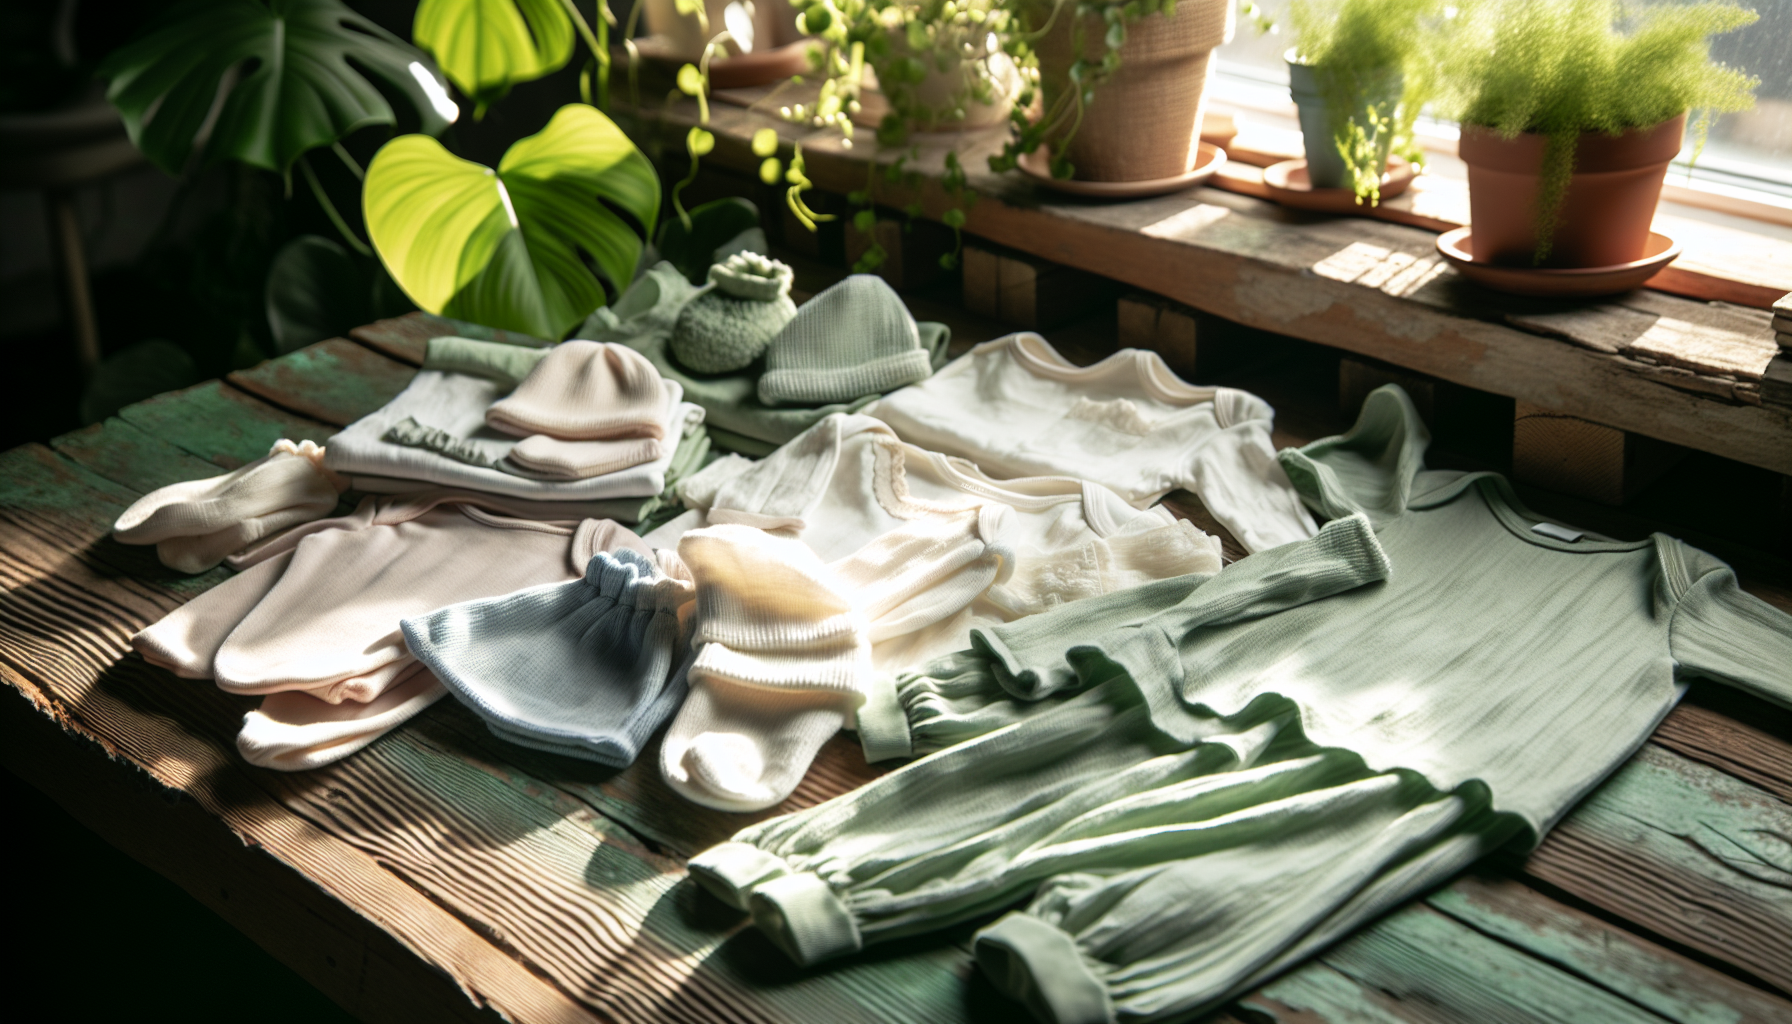 Organic cotton baby clothing displayed in a natural setting